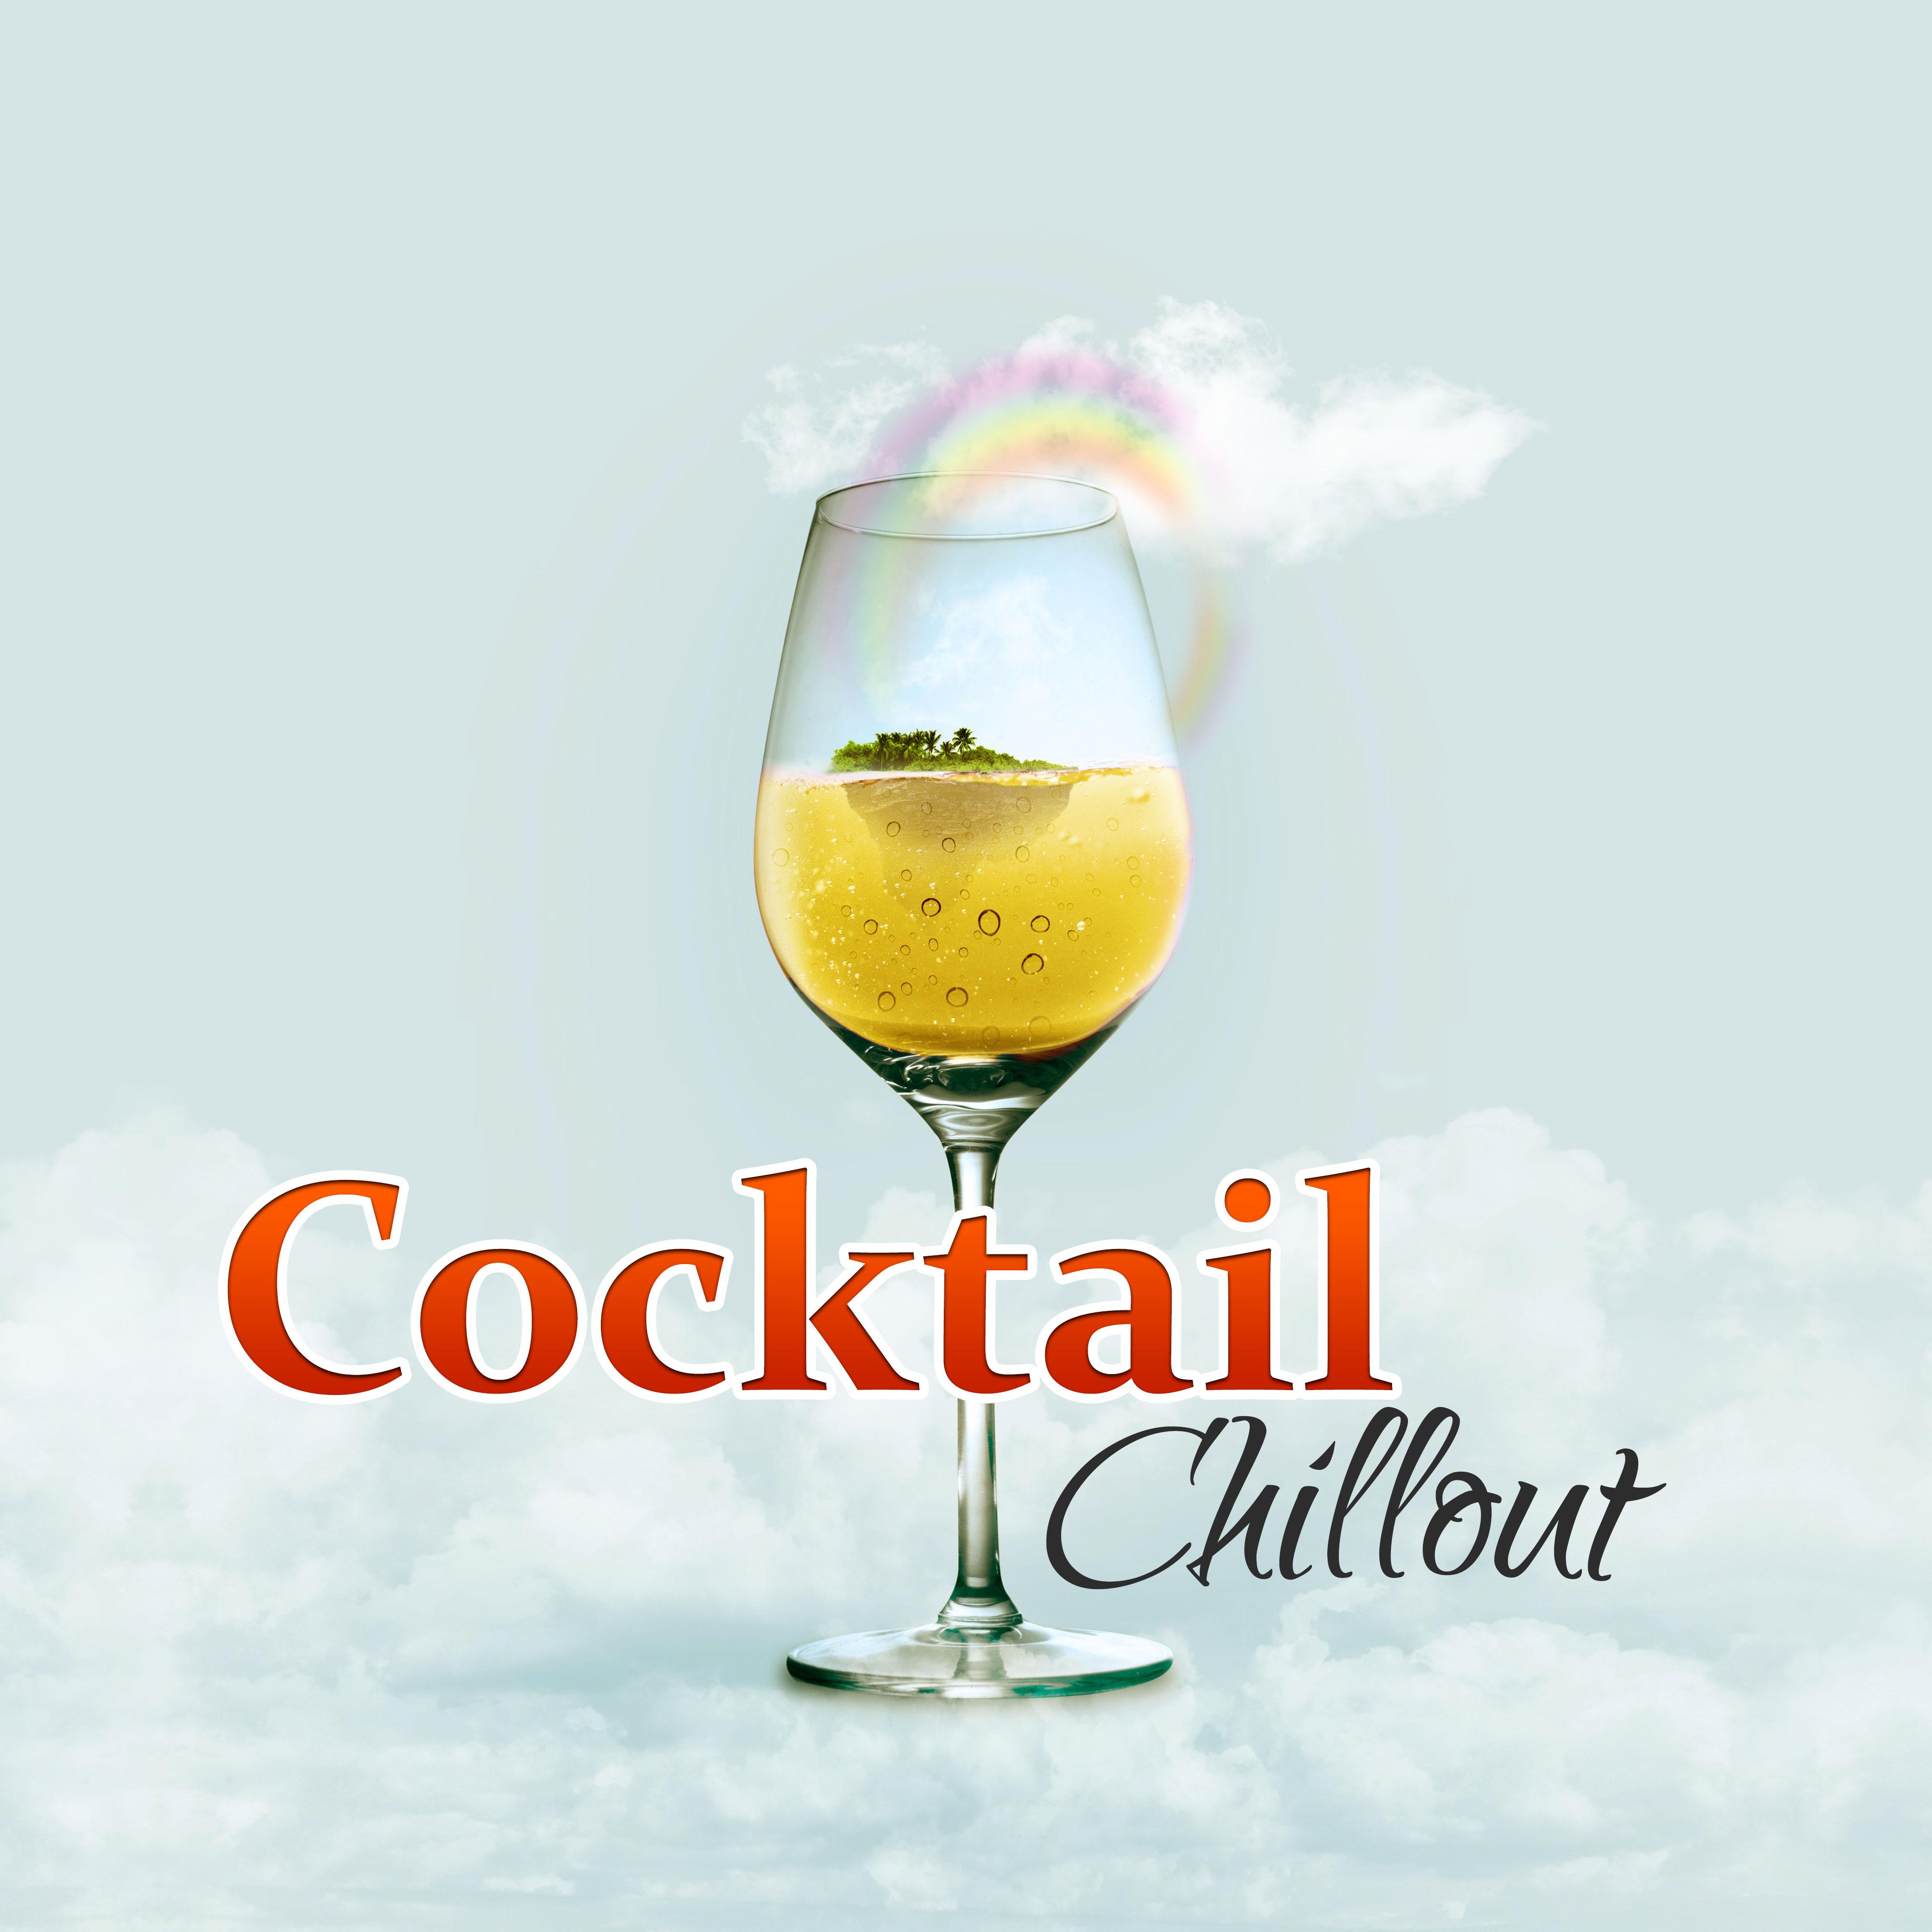 Cocktail Chillout  The best Collection of Chillout Music, Peaceful Chill, Soft Music, Relaxation Sounds